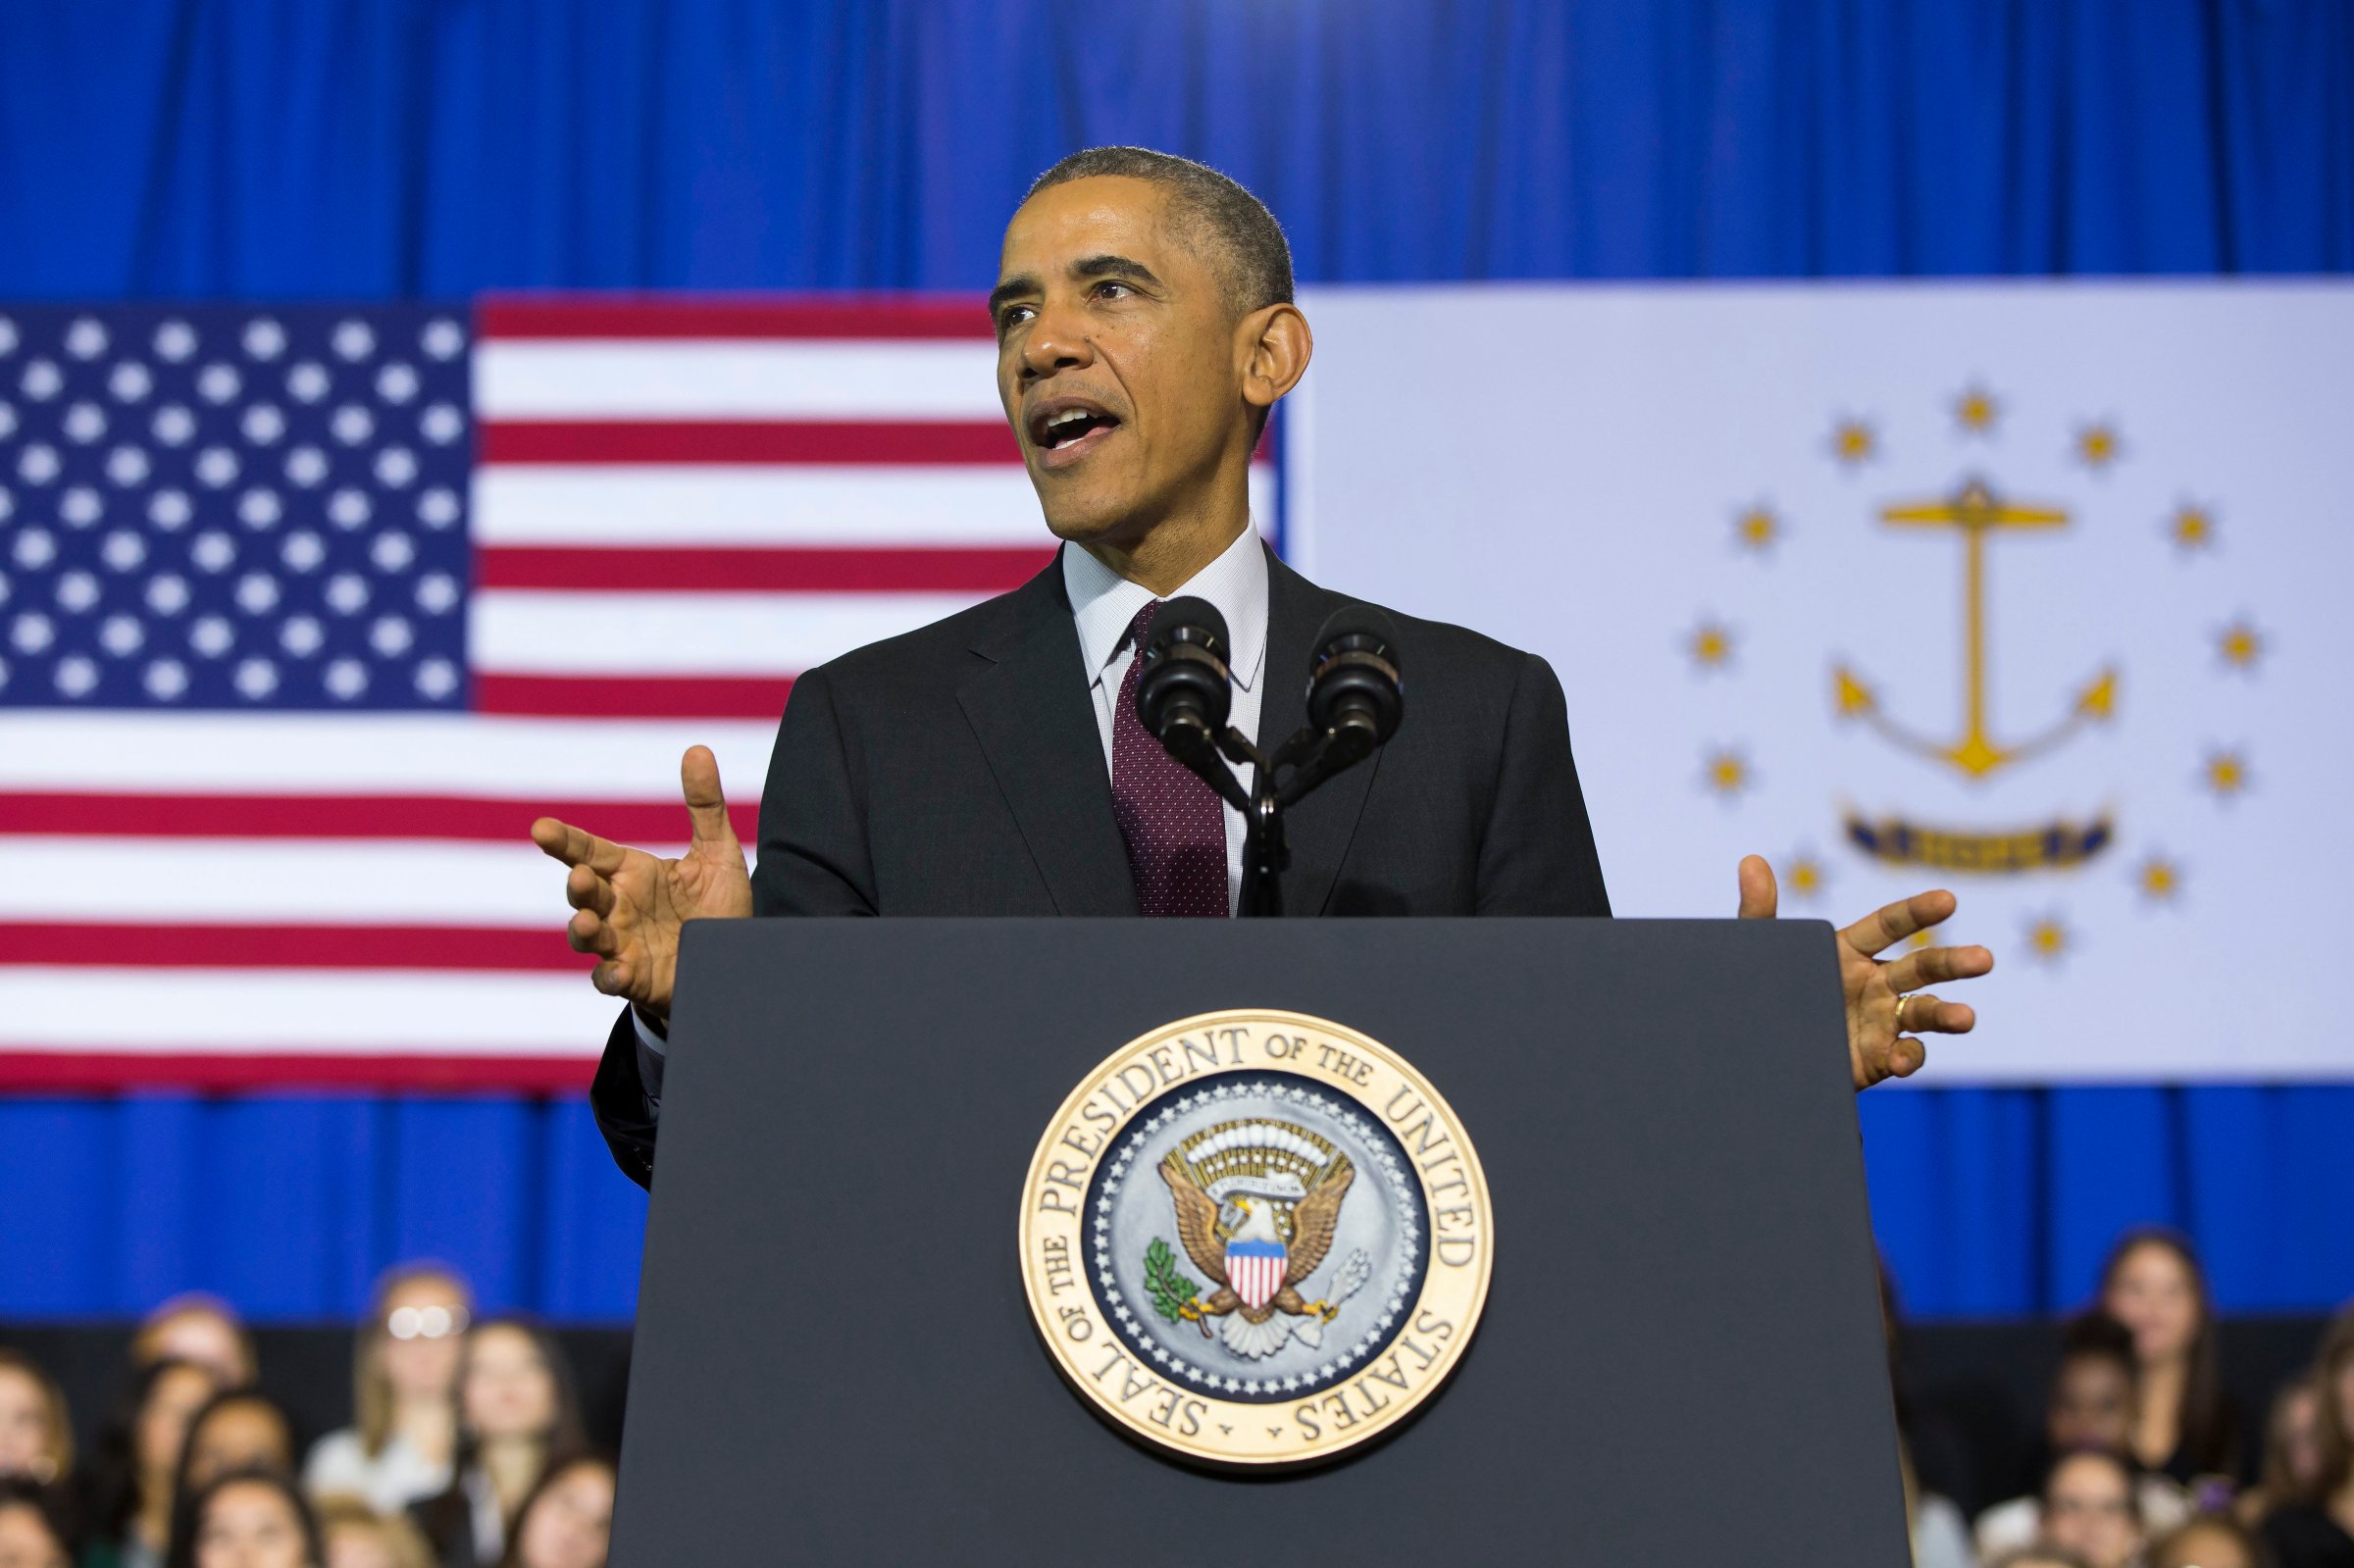 President Barack Obama speaks about the economy at Rhode Island College in Providence, R.I. on Oct. 31, 2014.